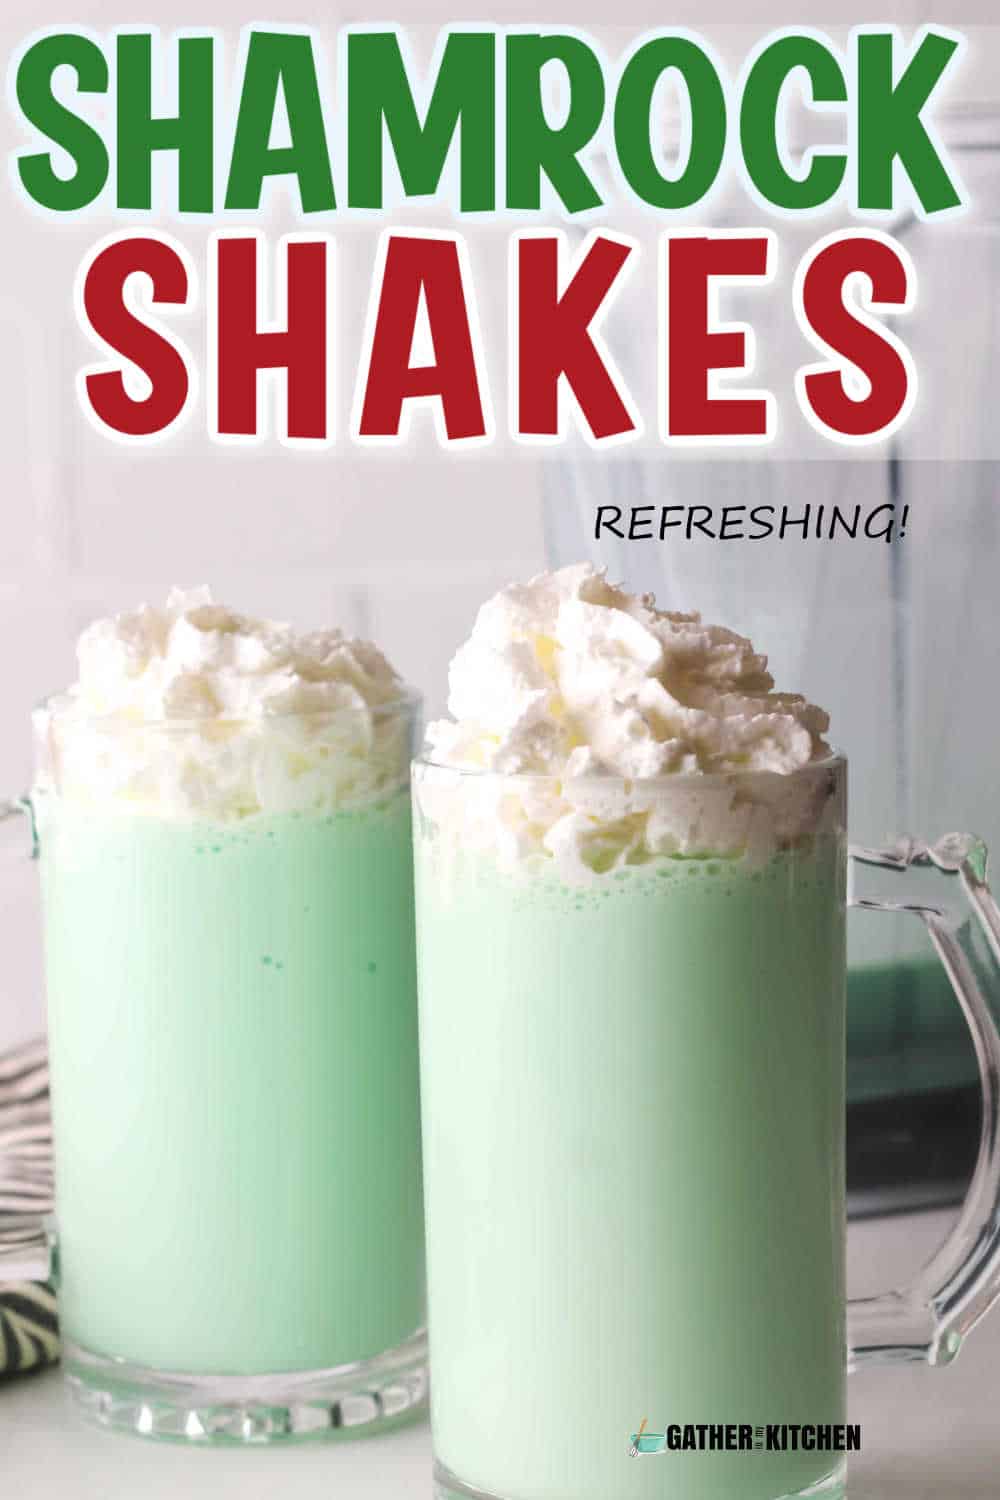 Pin image: top says "Shamrock Shakes" and has a pic of 2 glasses of shamrock milk shakes.